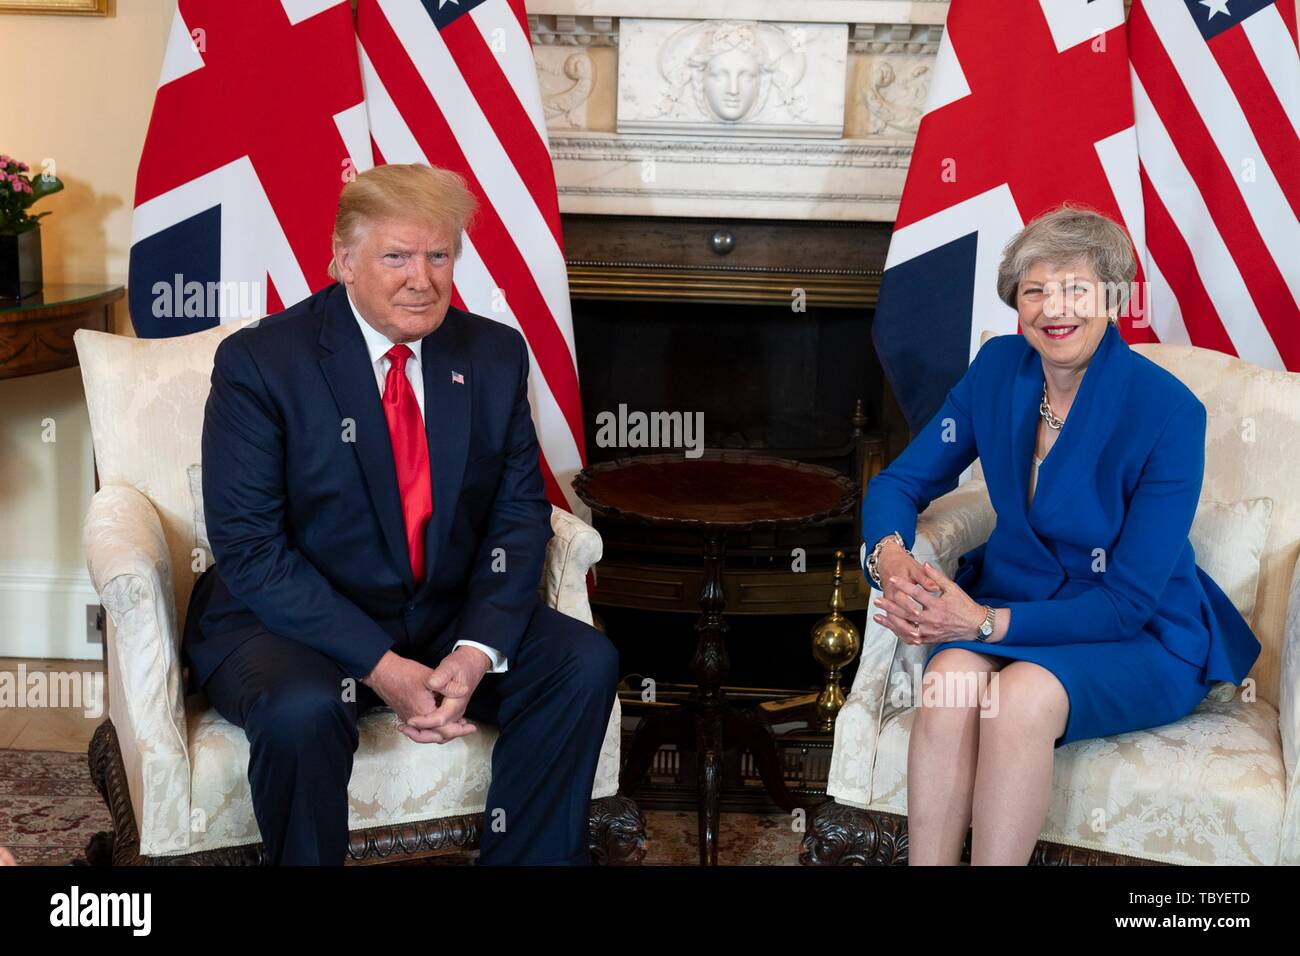 London, UK. 04th June, 2019. U.S President Donald Trump meets with outgoing British Prime Minister Theresa May at No. 10 Downing Street June 4, 2019 in London, England. Credit: Planetpix/Alamy Live News Stock Photo